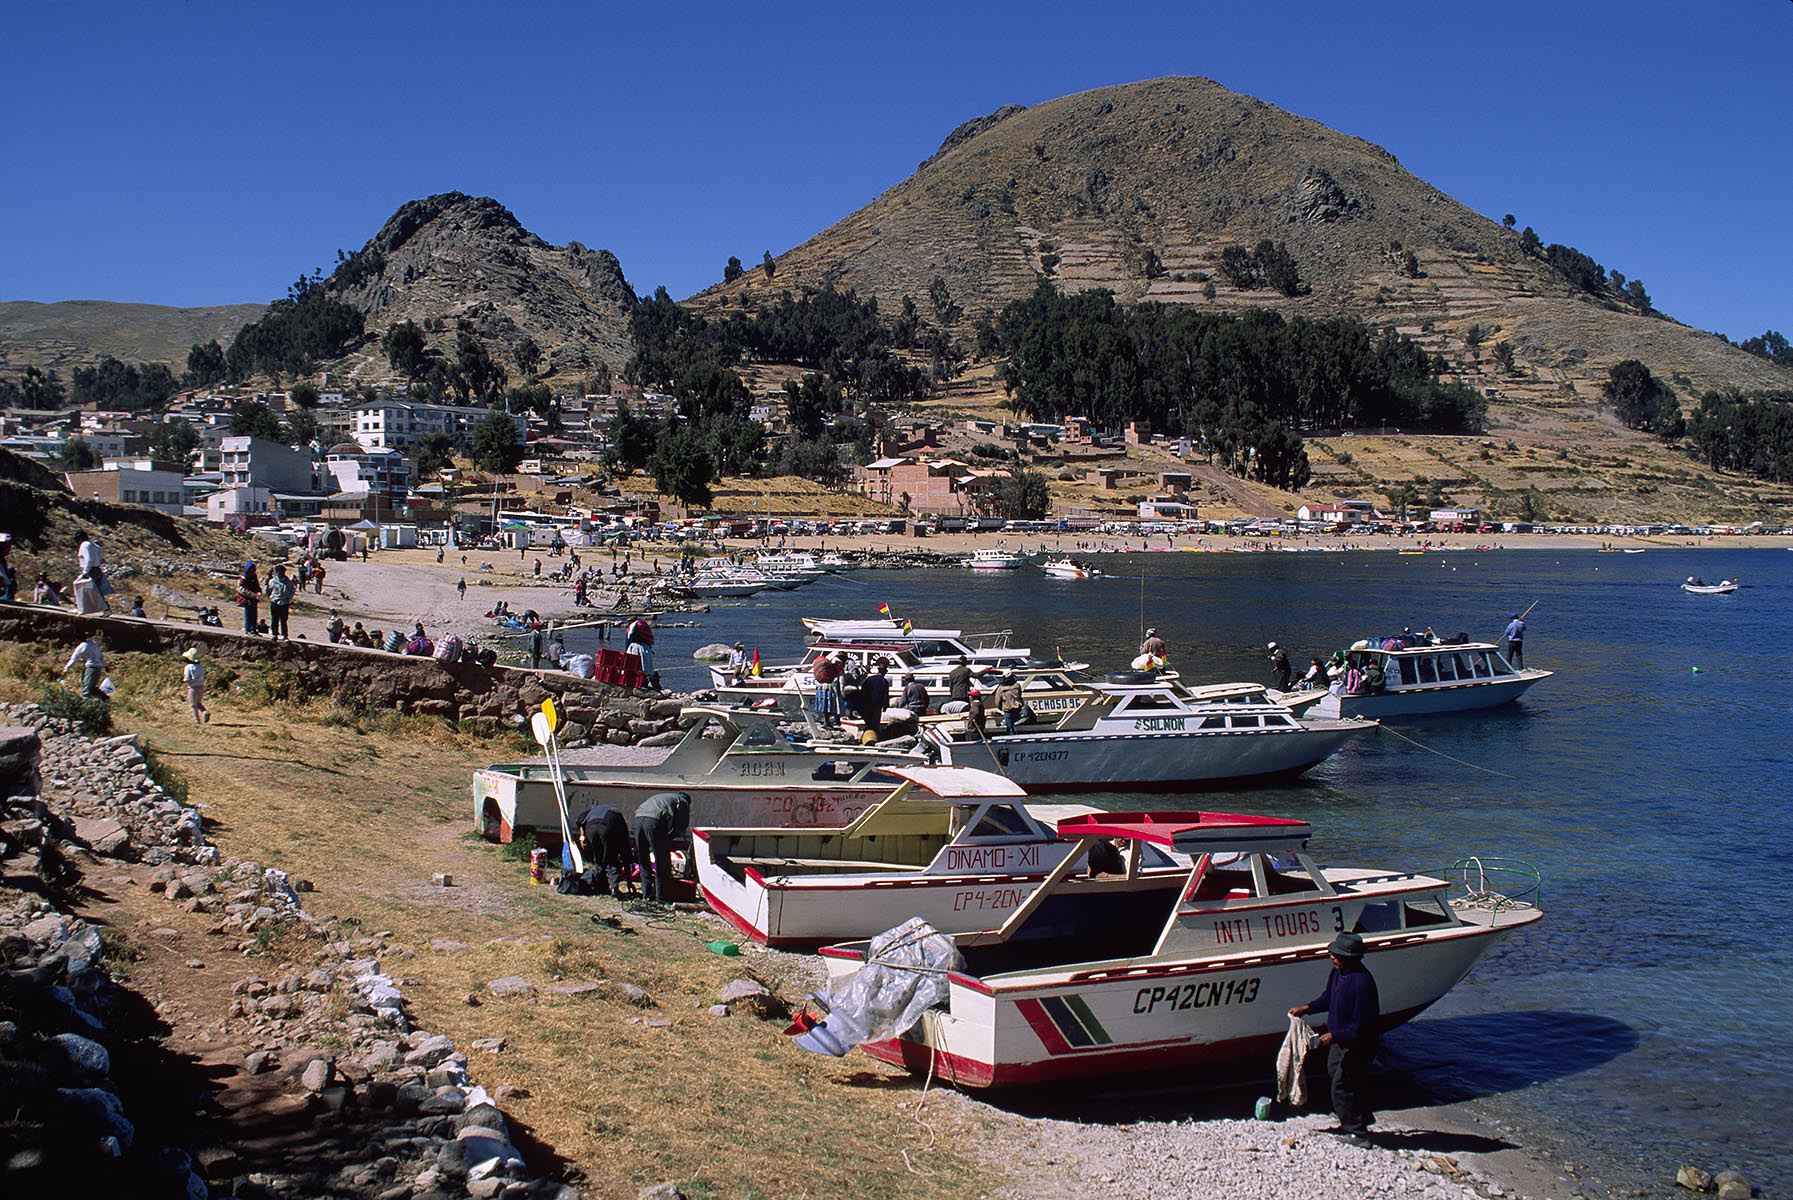 BOATS in the HARBOR and along the shore of COPACABANA - LAKE TITICACA, PERU